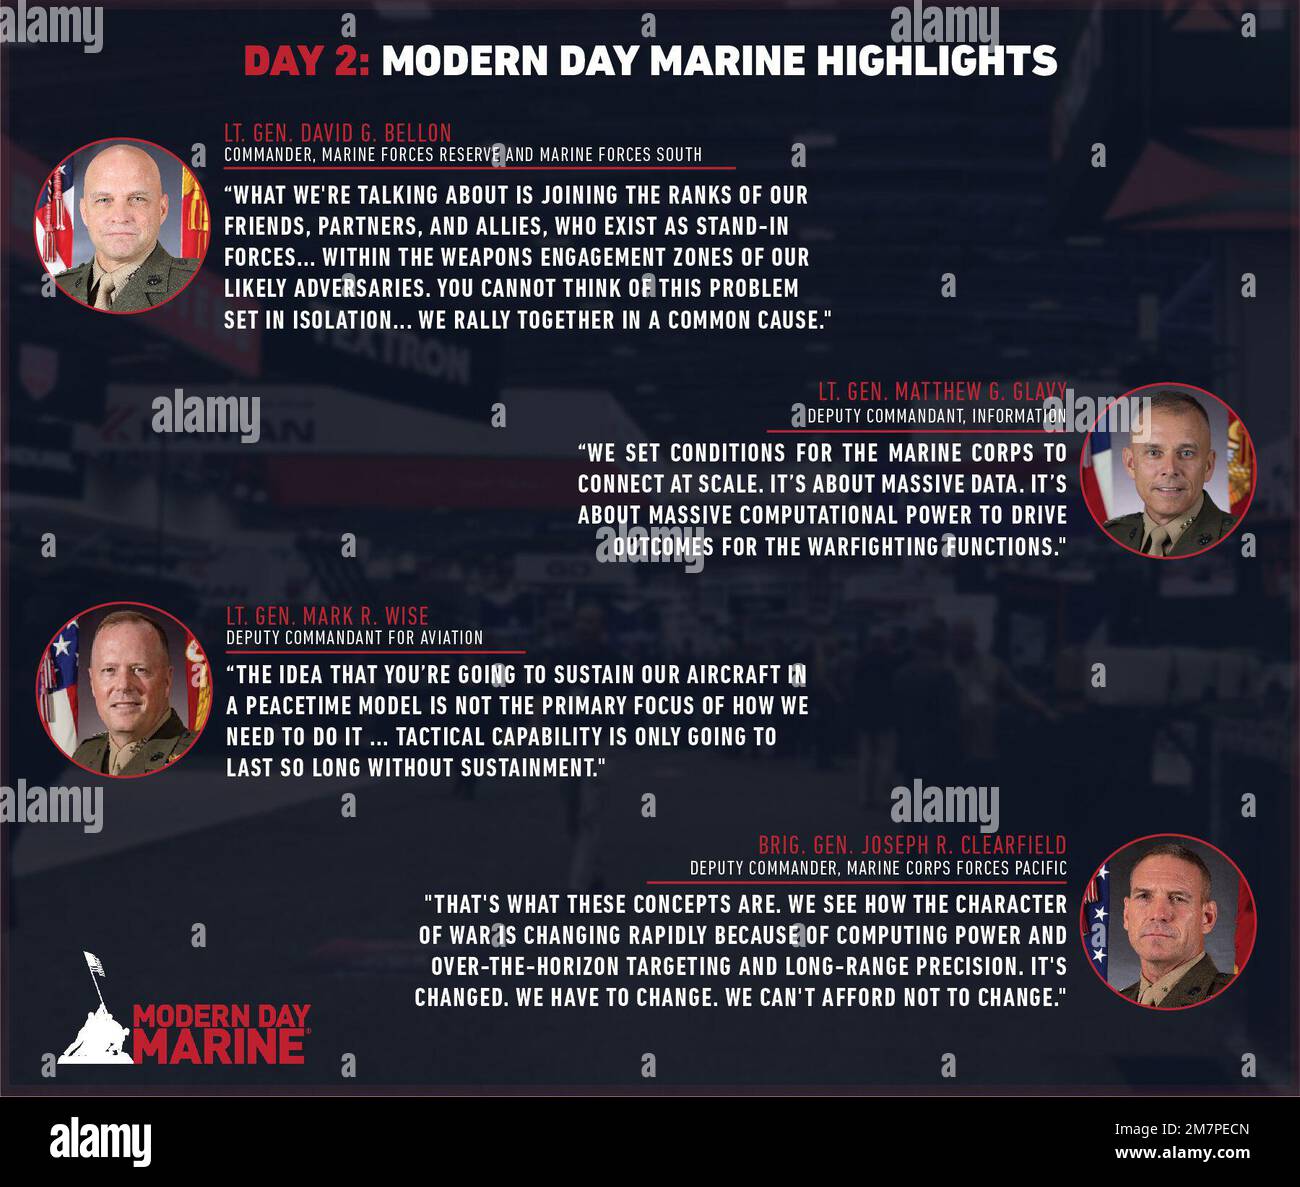 The Modern Day Marine Day 2 Highlights infographic allows for the viewer to  “catch up” on important quotes they may have missed from multiple speakers  during Day 2 of the event, which